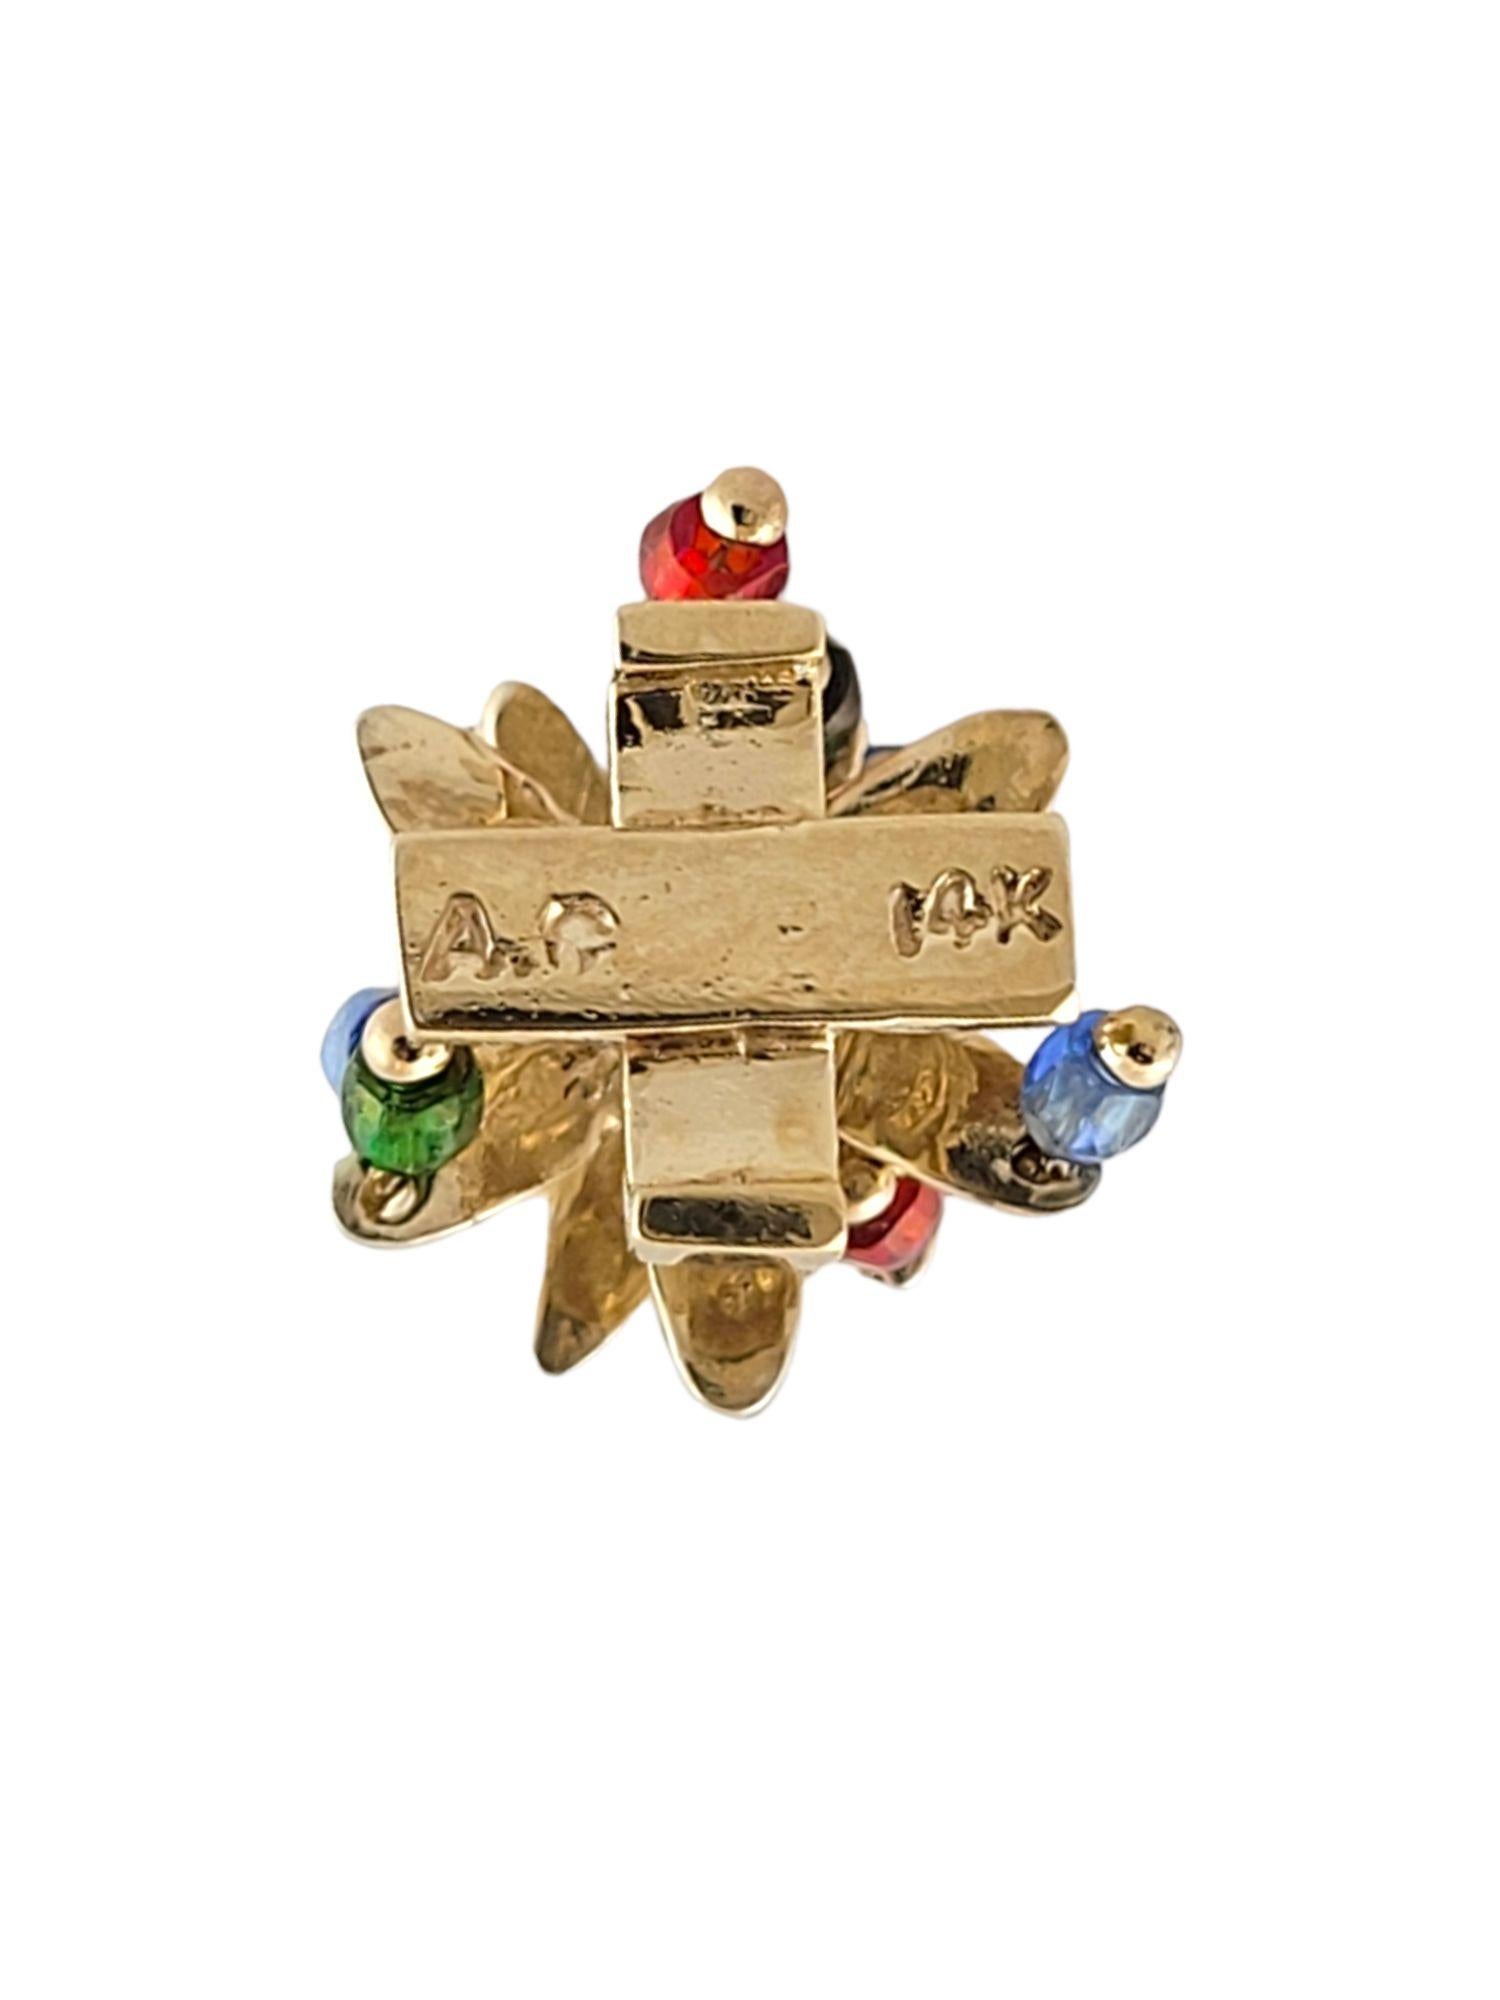 Vintage 14K Yellow Gold Christmas Tree Charm

Adorable 14K gold Christmas tree charm decorated with multicolored enamel ornaments!

Size: 27mm X 11mm X 13mm
Length w/ bail: 31mm

Weight: 3.3 g/ 2.1 dwt

Hallmark: A.R. 14K

Very good condition,